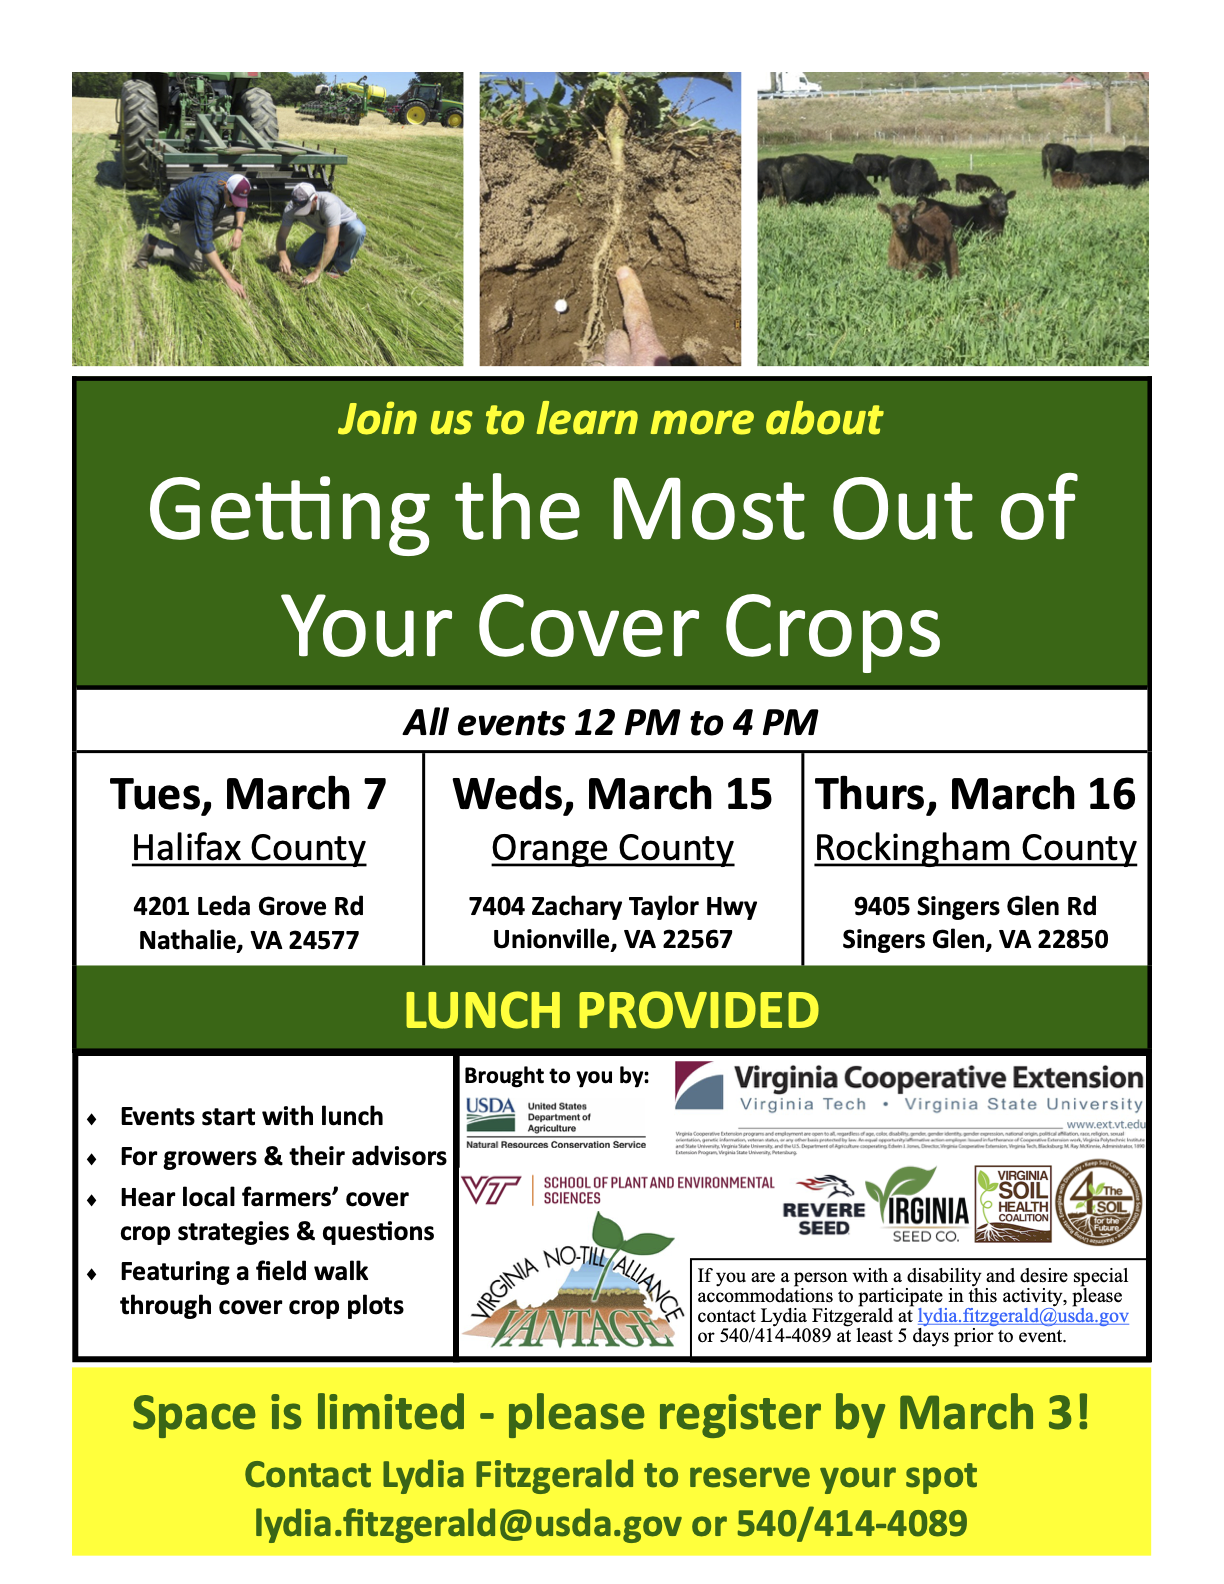 Join us for cover crop field days this spring